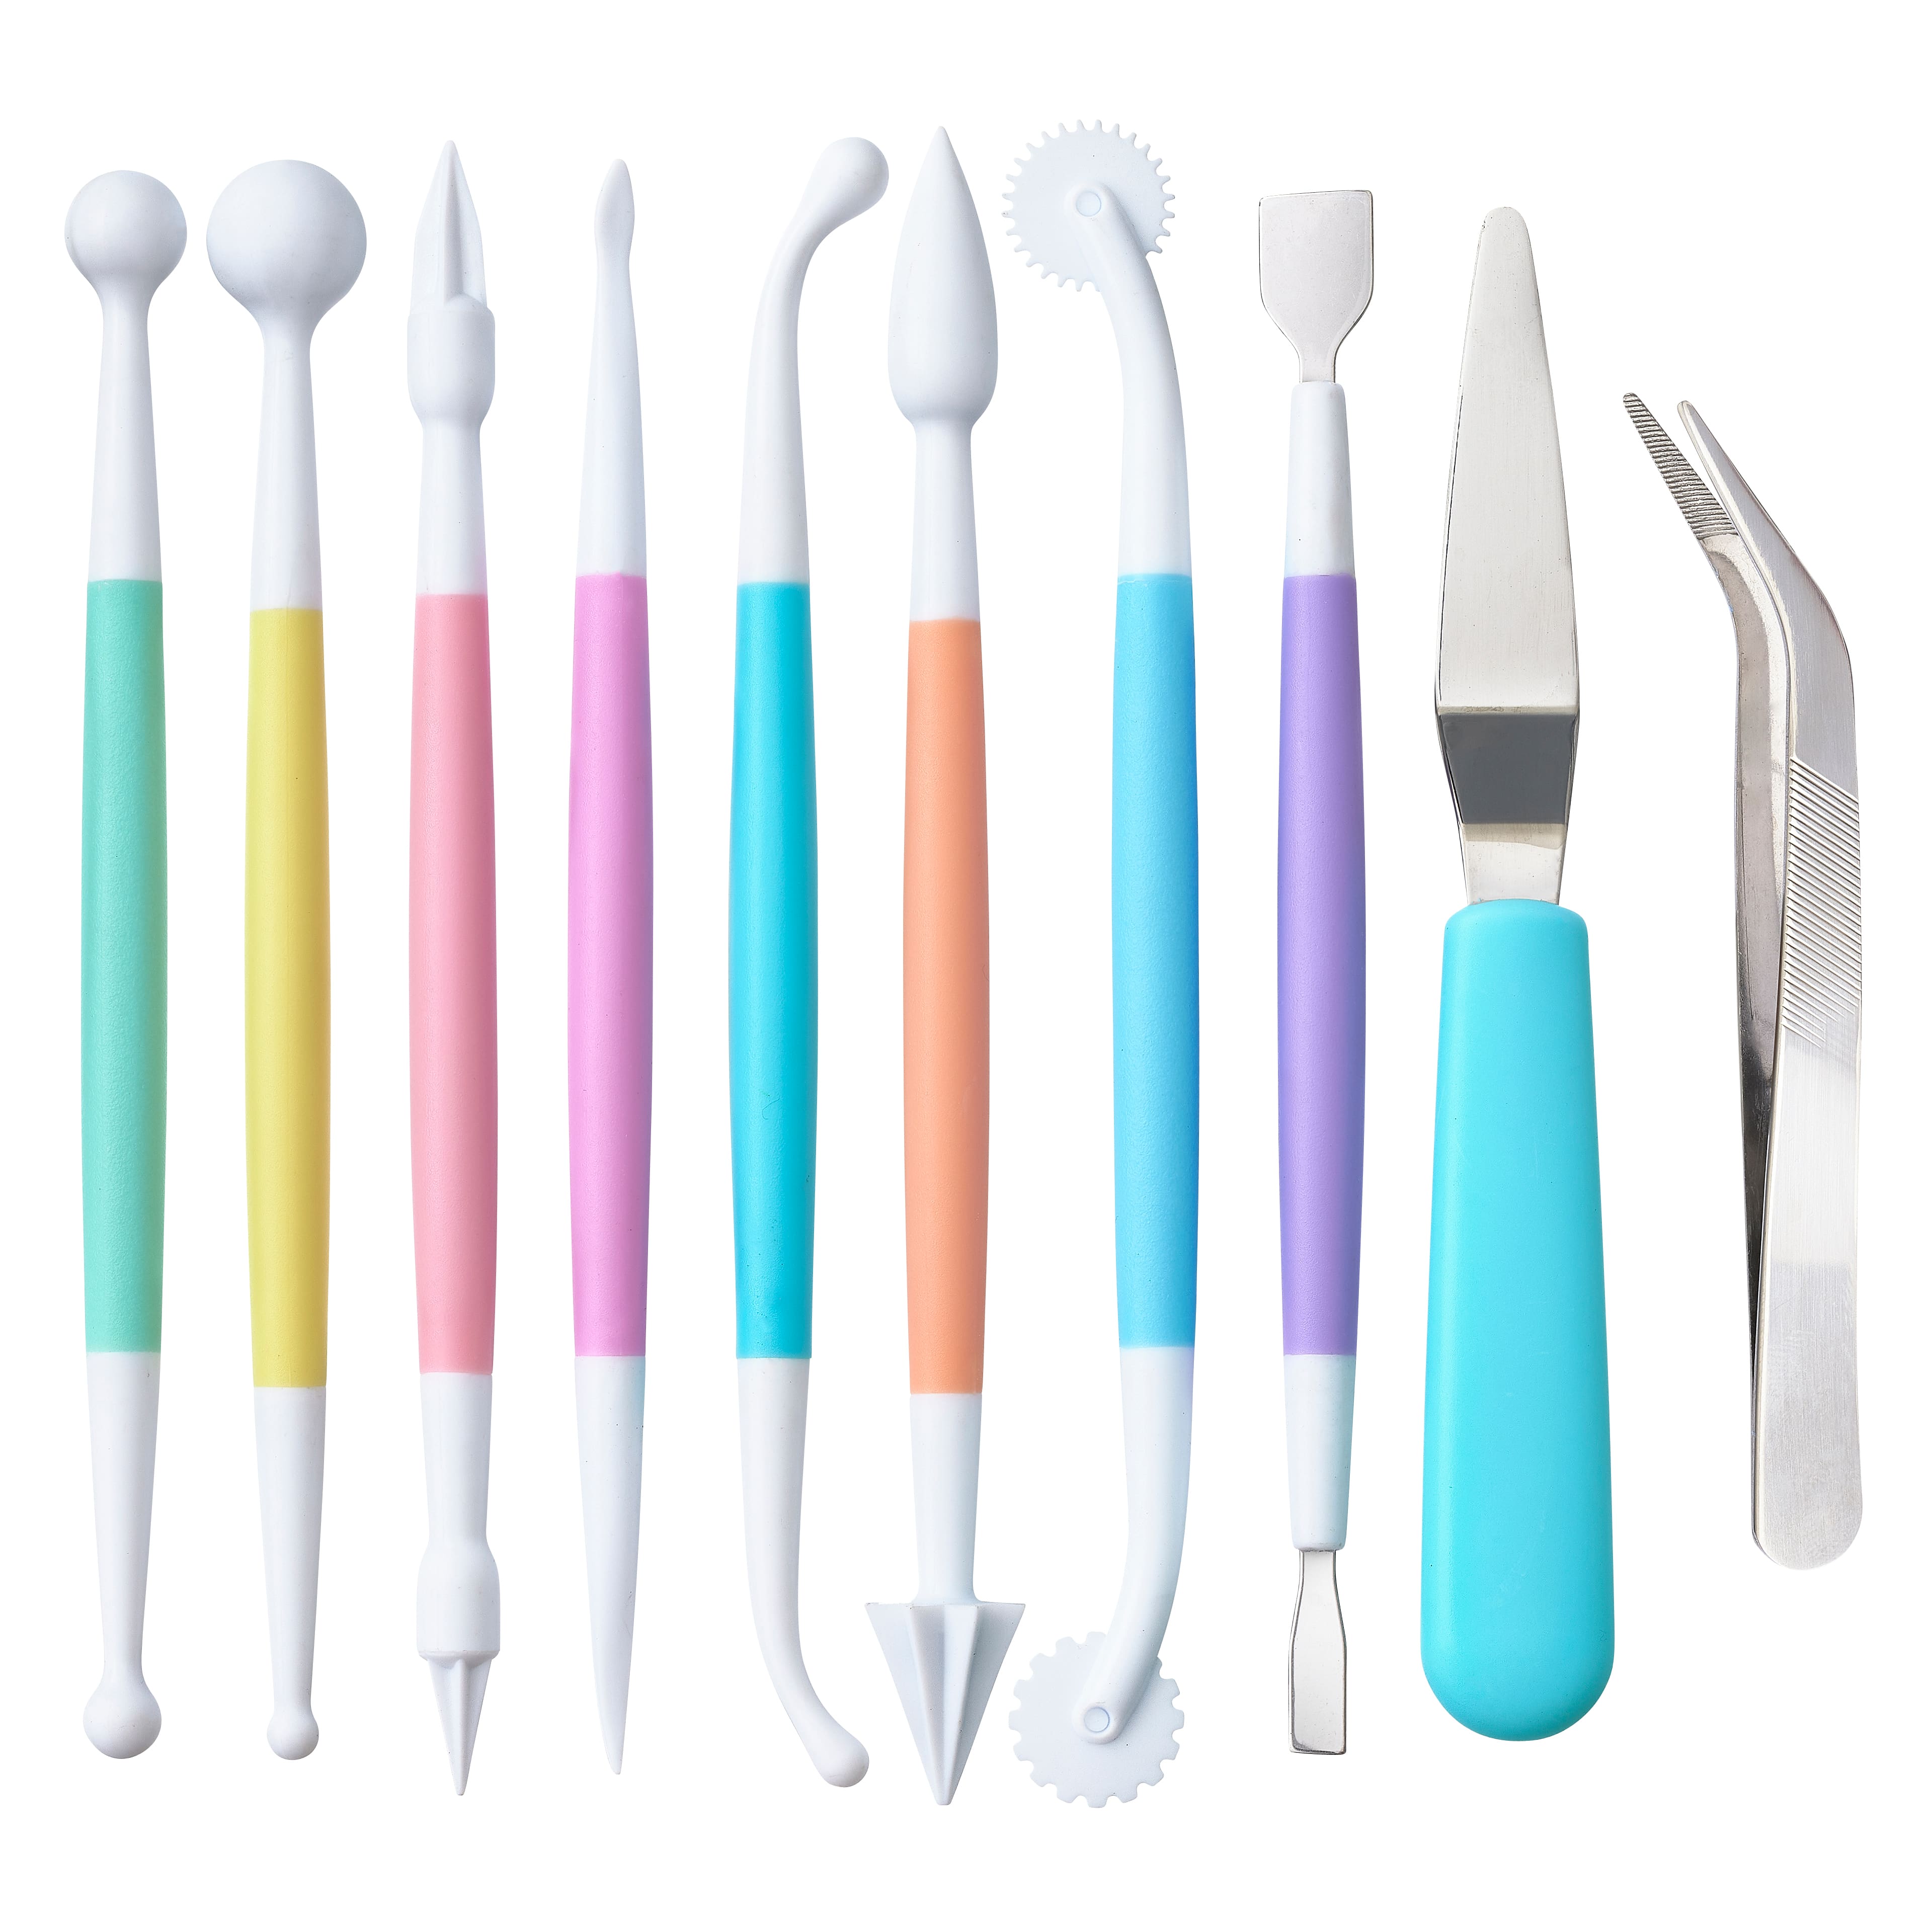 Tools & Gadgets That Are Really Helpful When Using Fondant